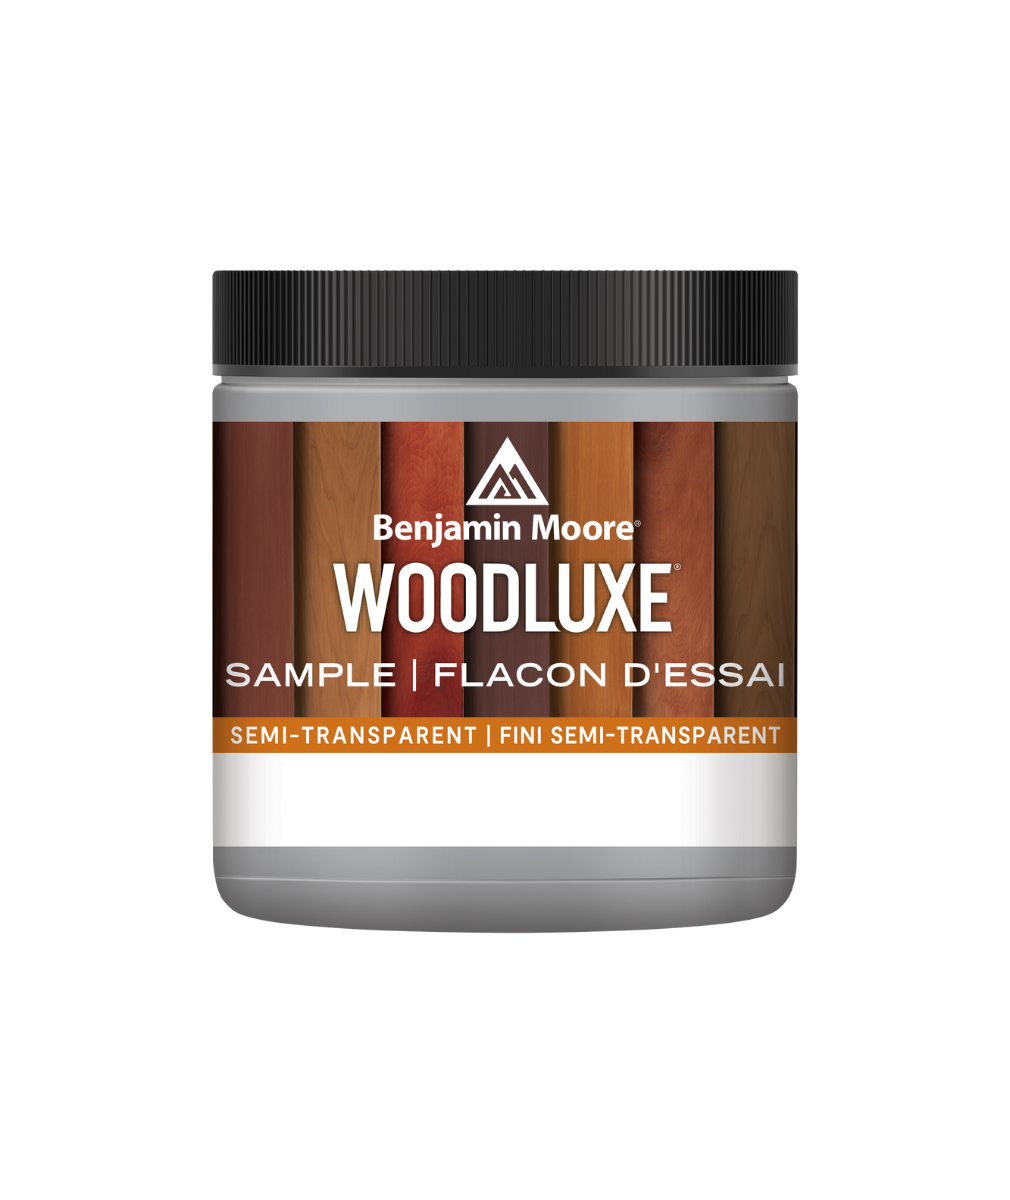 Benjamin Moore Woodluxe® Water-Based Semi-Transparent Exterior Stain Half Pint Sample available to shop at Regal Paint Centers in Maryland, Virginia and DC.